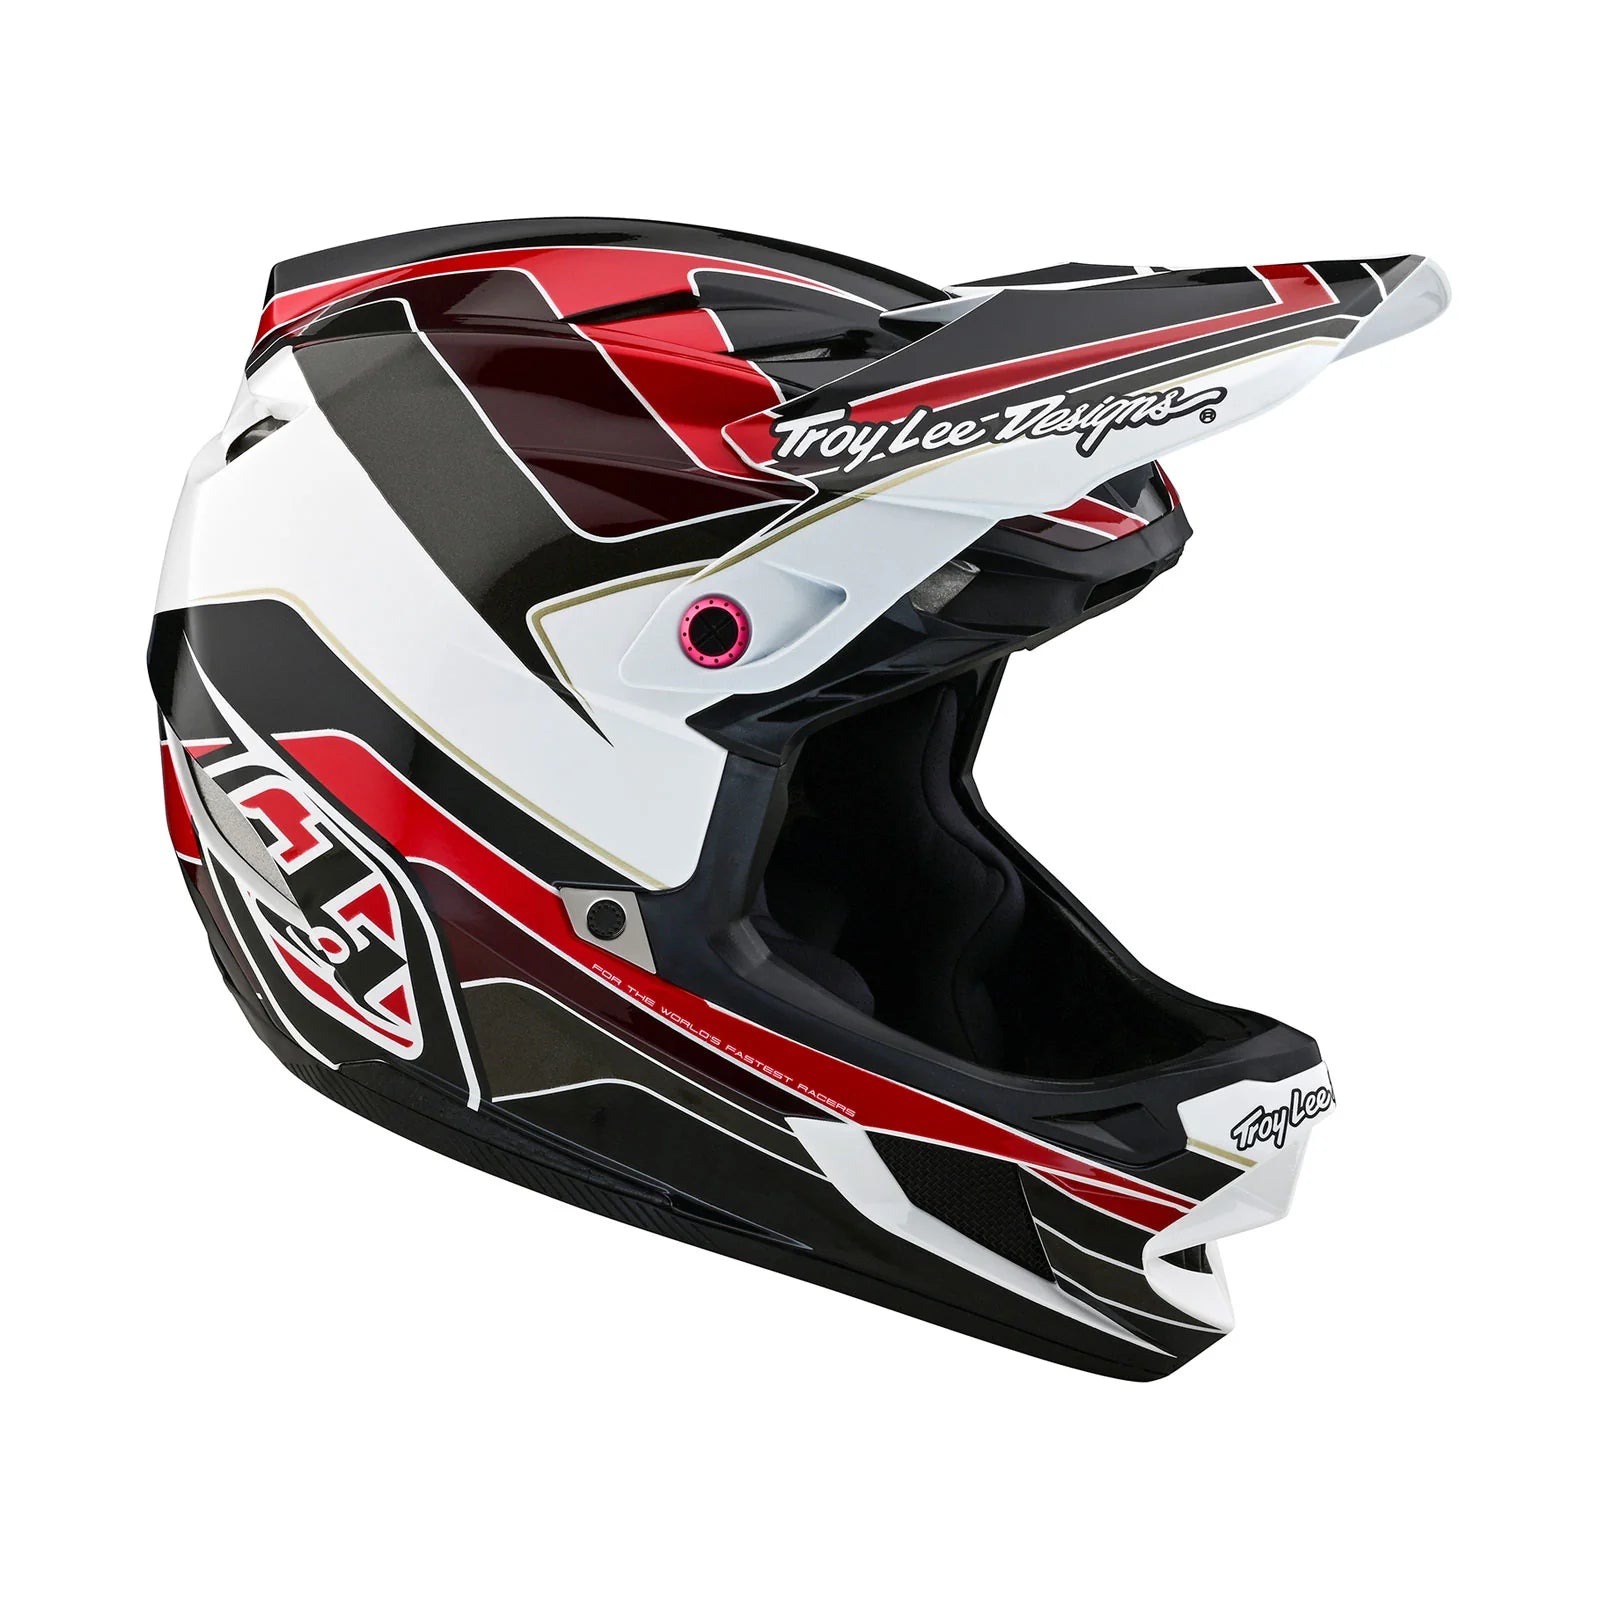 A TLD D4 AS Polyacrylite helmet with a black and red design ensures safety.